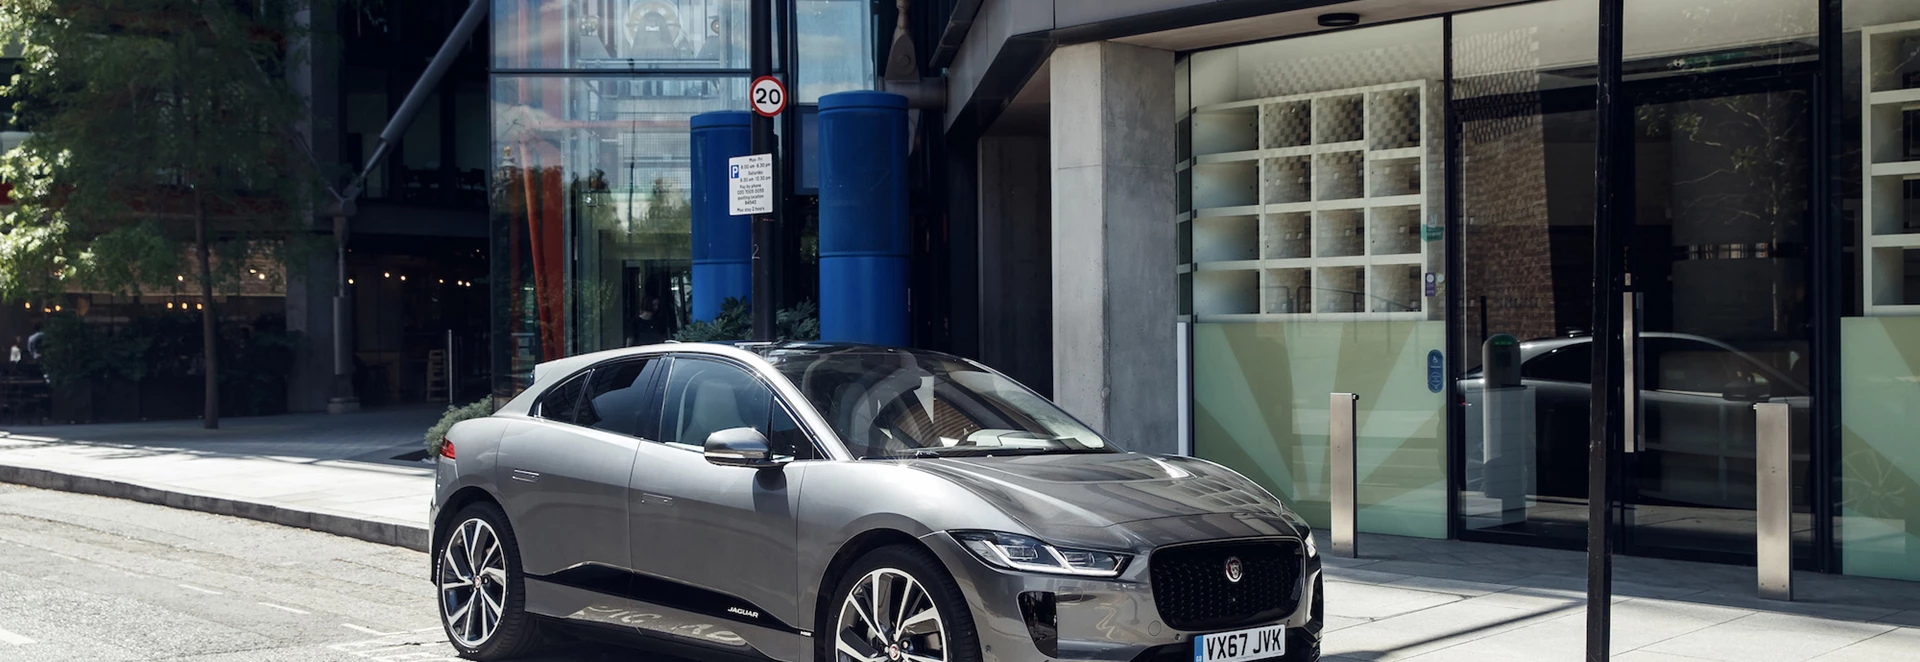 Jaguar delivers range boost to I-Pace with new software update